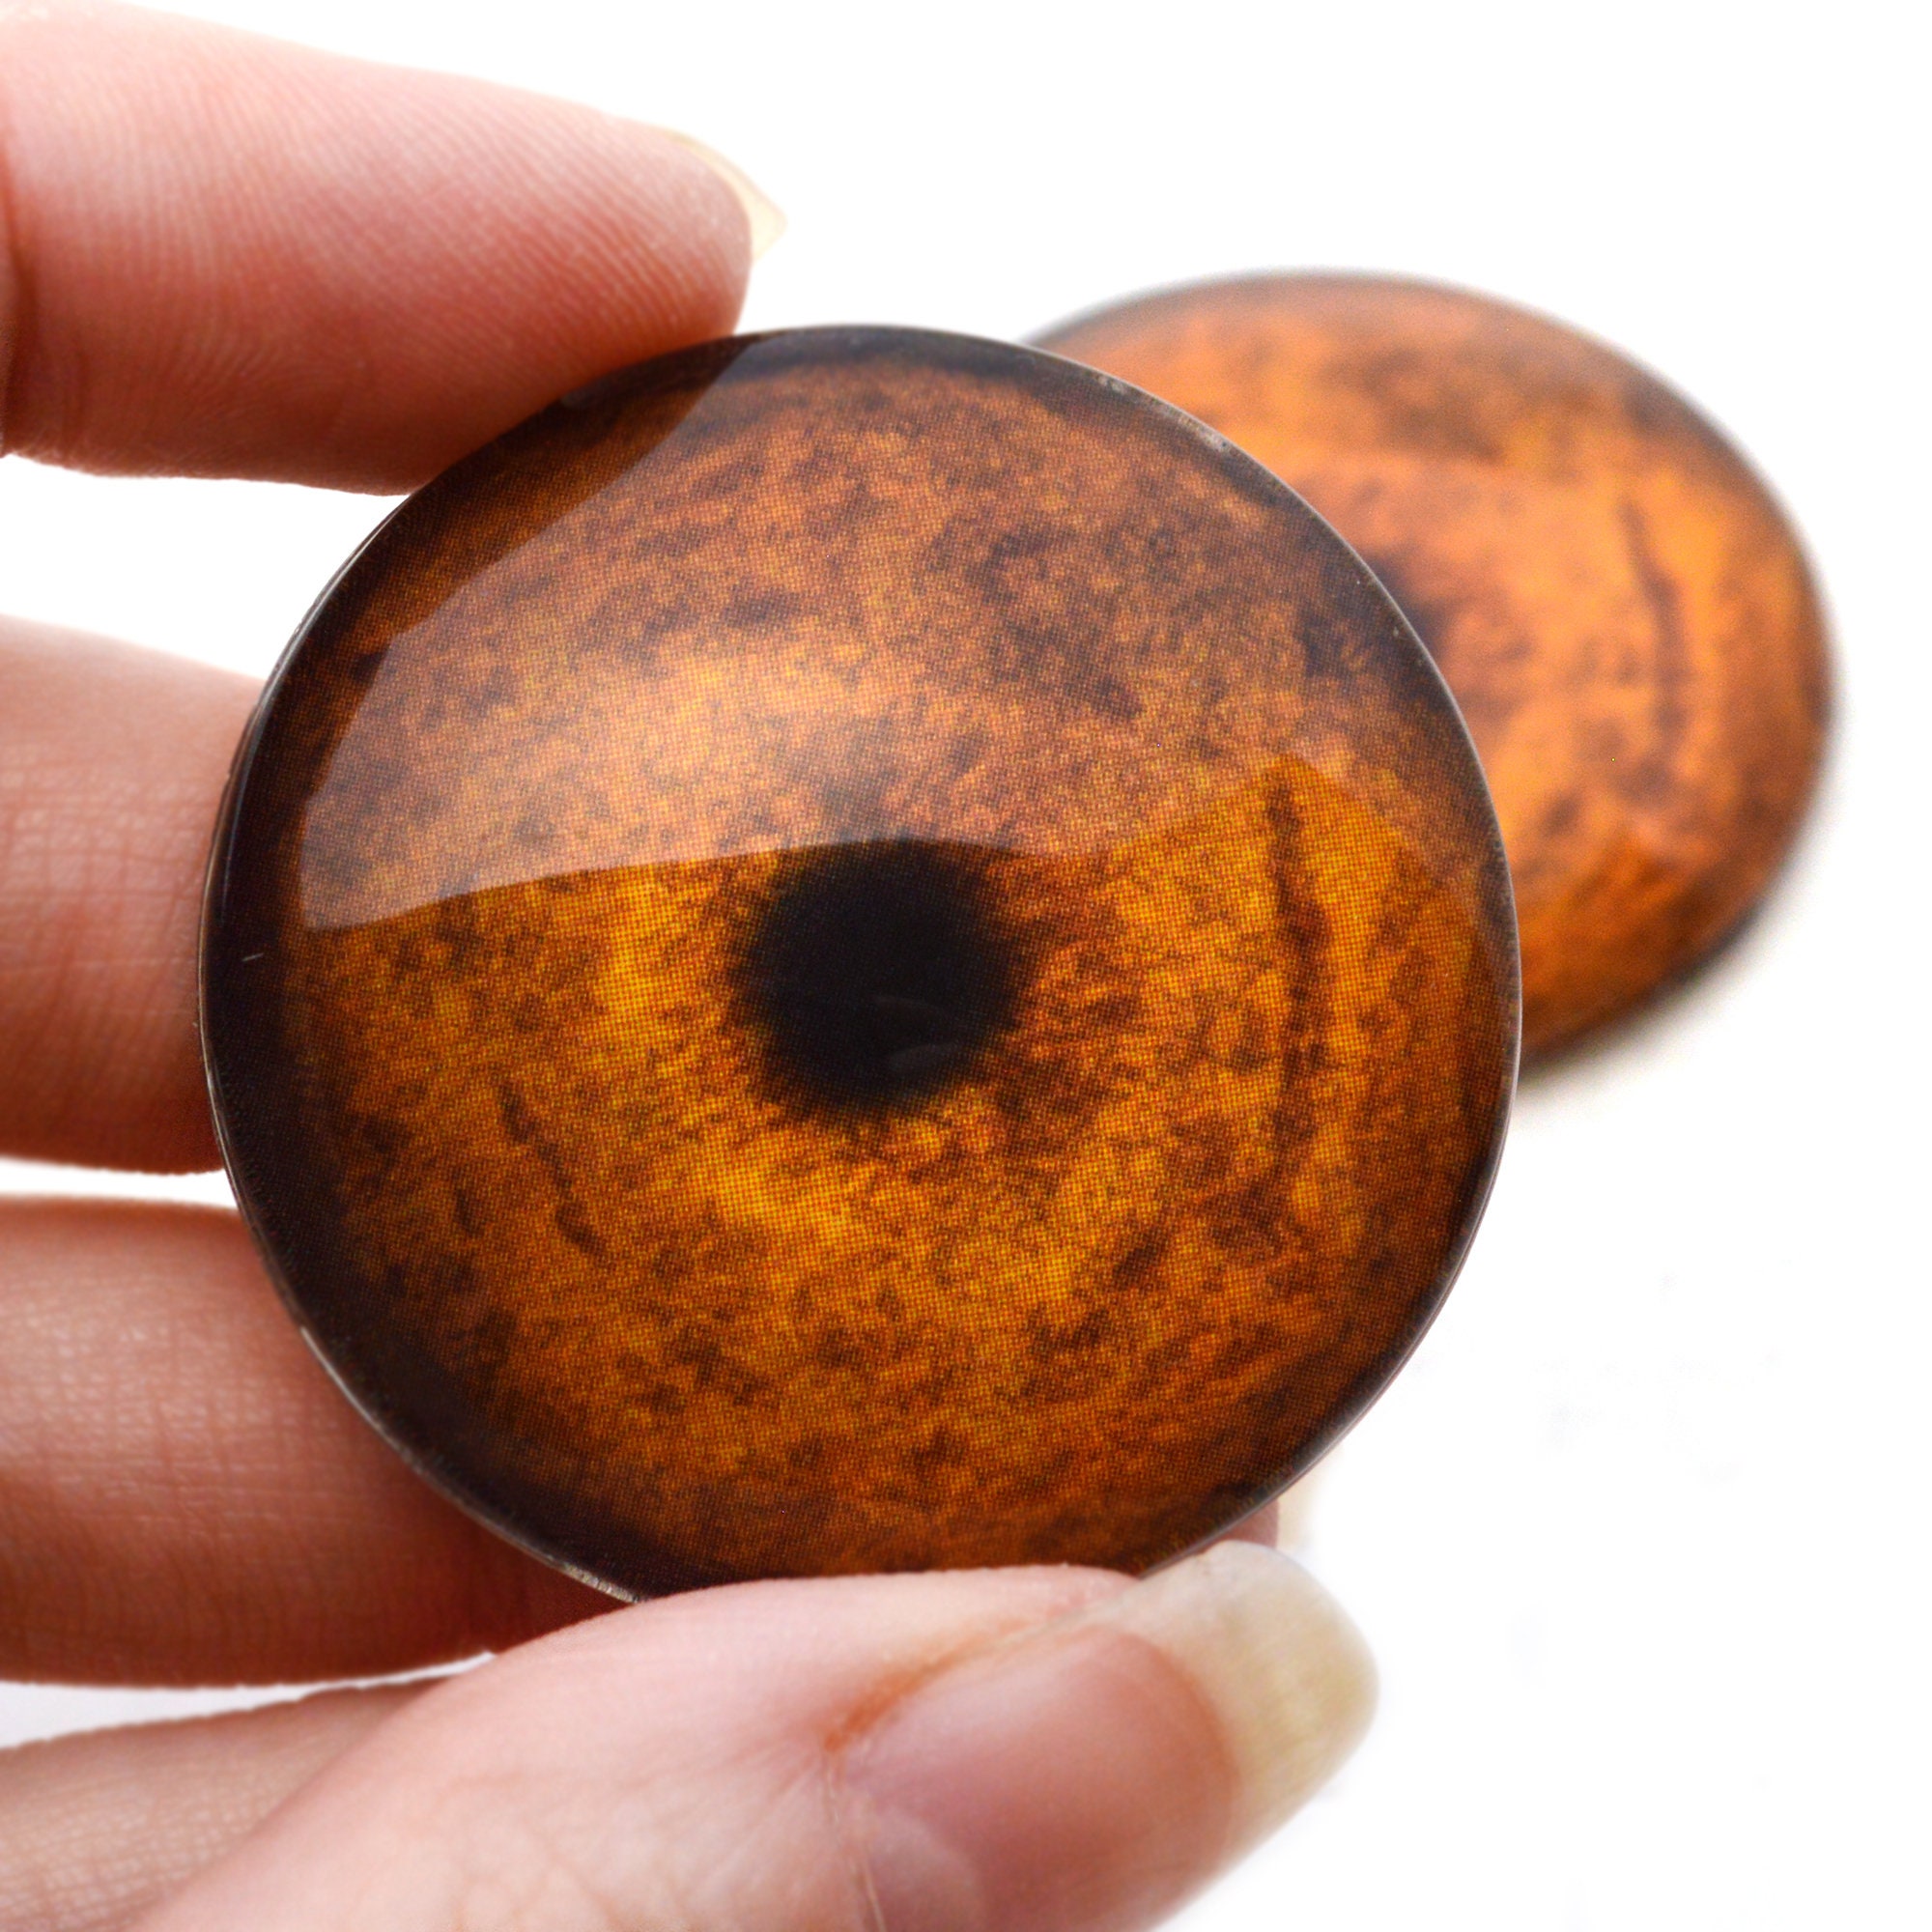 Brown Teddy Bear Handmade Glass Eyes 6mm to 40mm Jewelry Cabochon Art Doll  Taxidermy Sculptures Polymer Clay Eyeball Flat Domed Detailed 